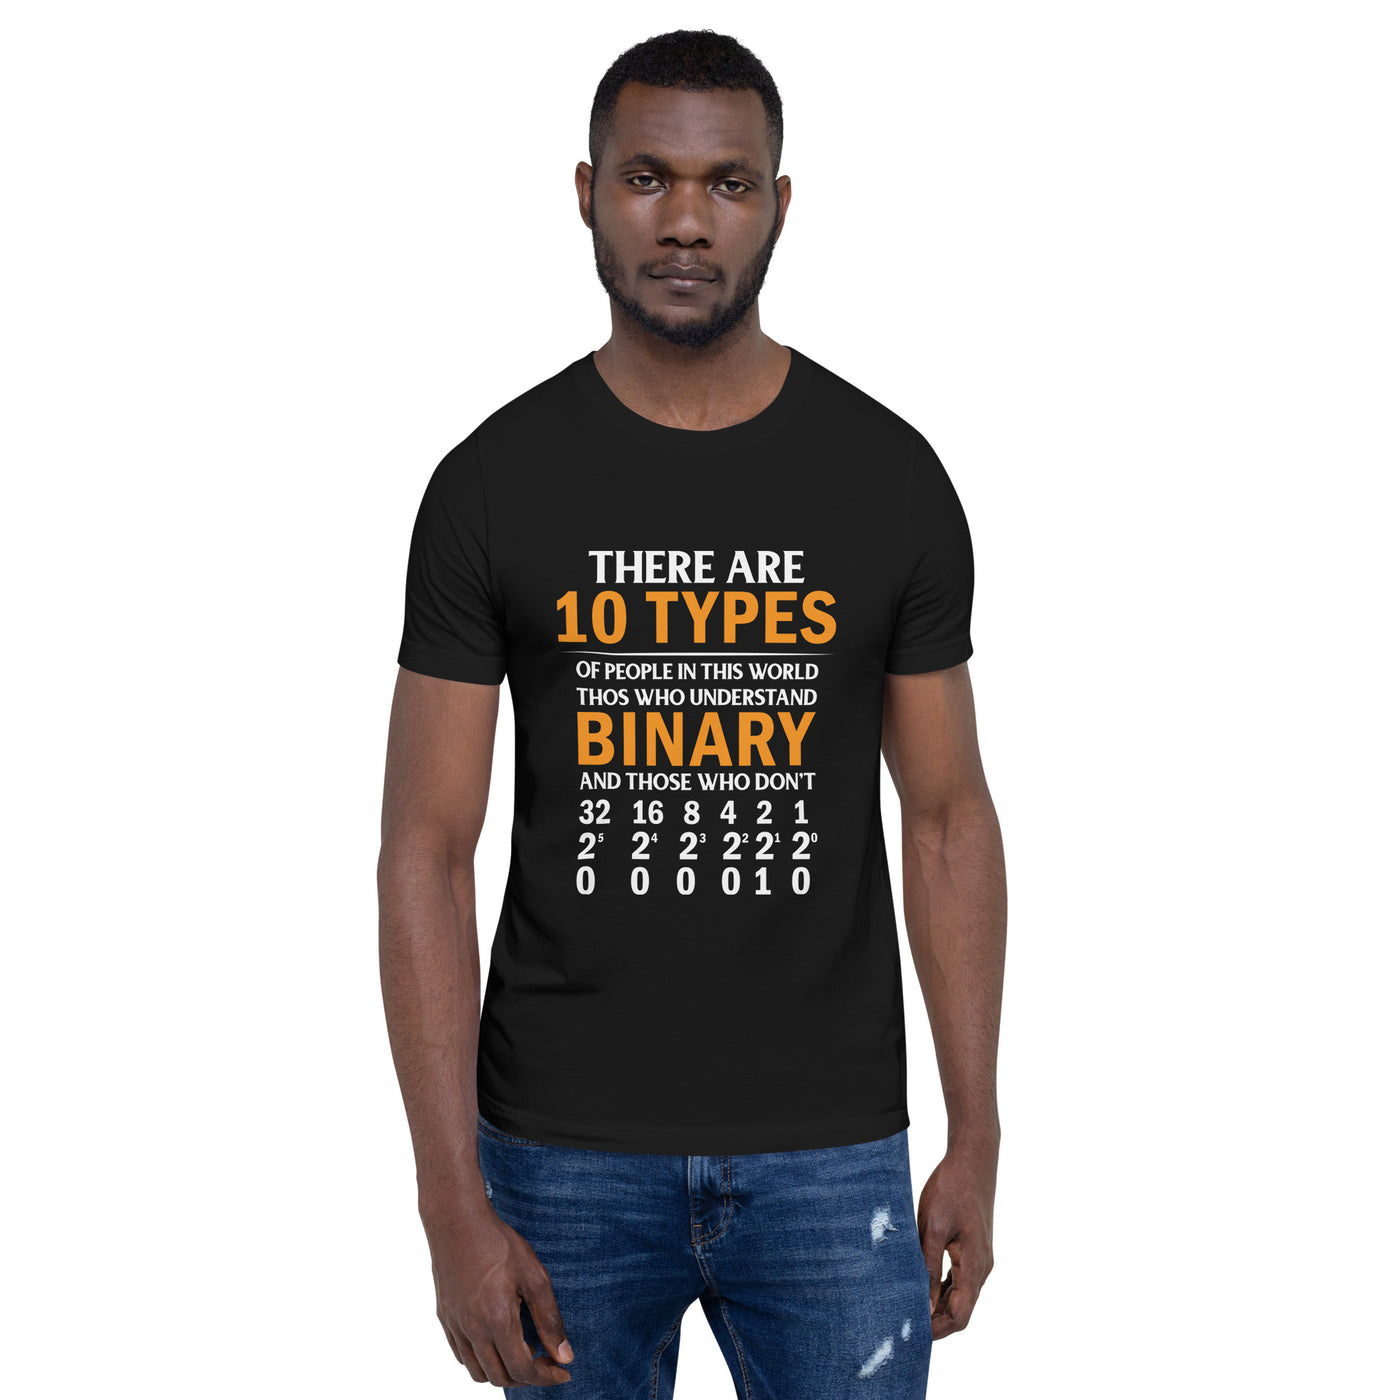 There are always 10 Types of People in this World - Unisex t-shirt